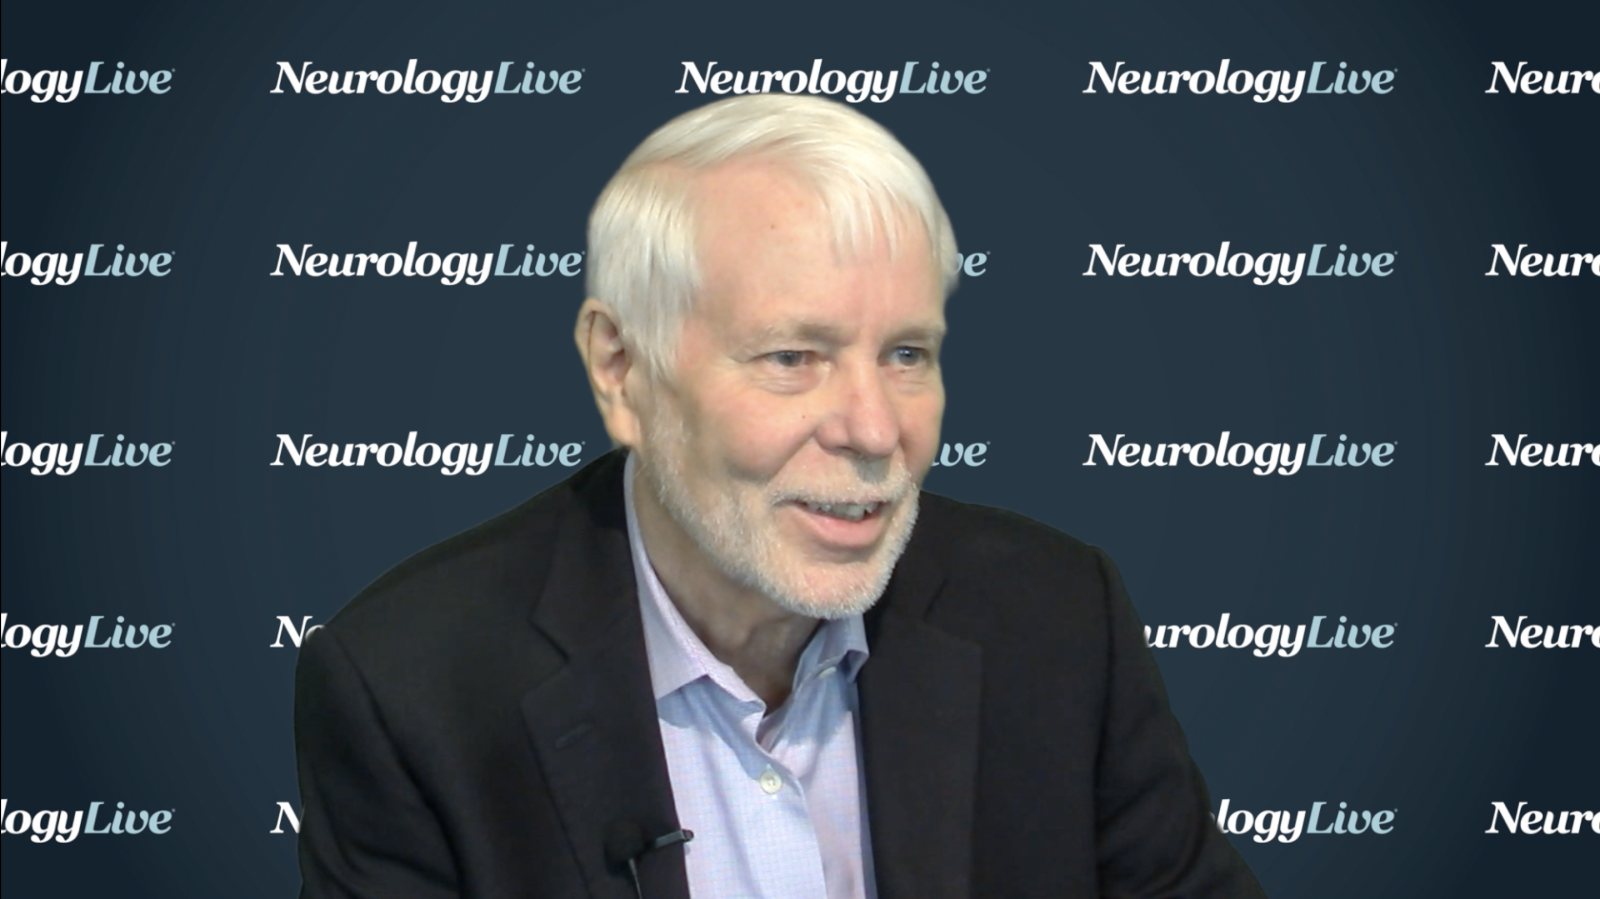 Bruce Trapp, PhD: Insights Gleaned from Myelocortical Multiple Sclerosis